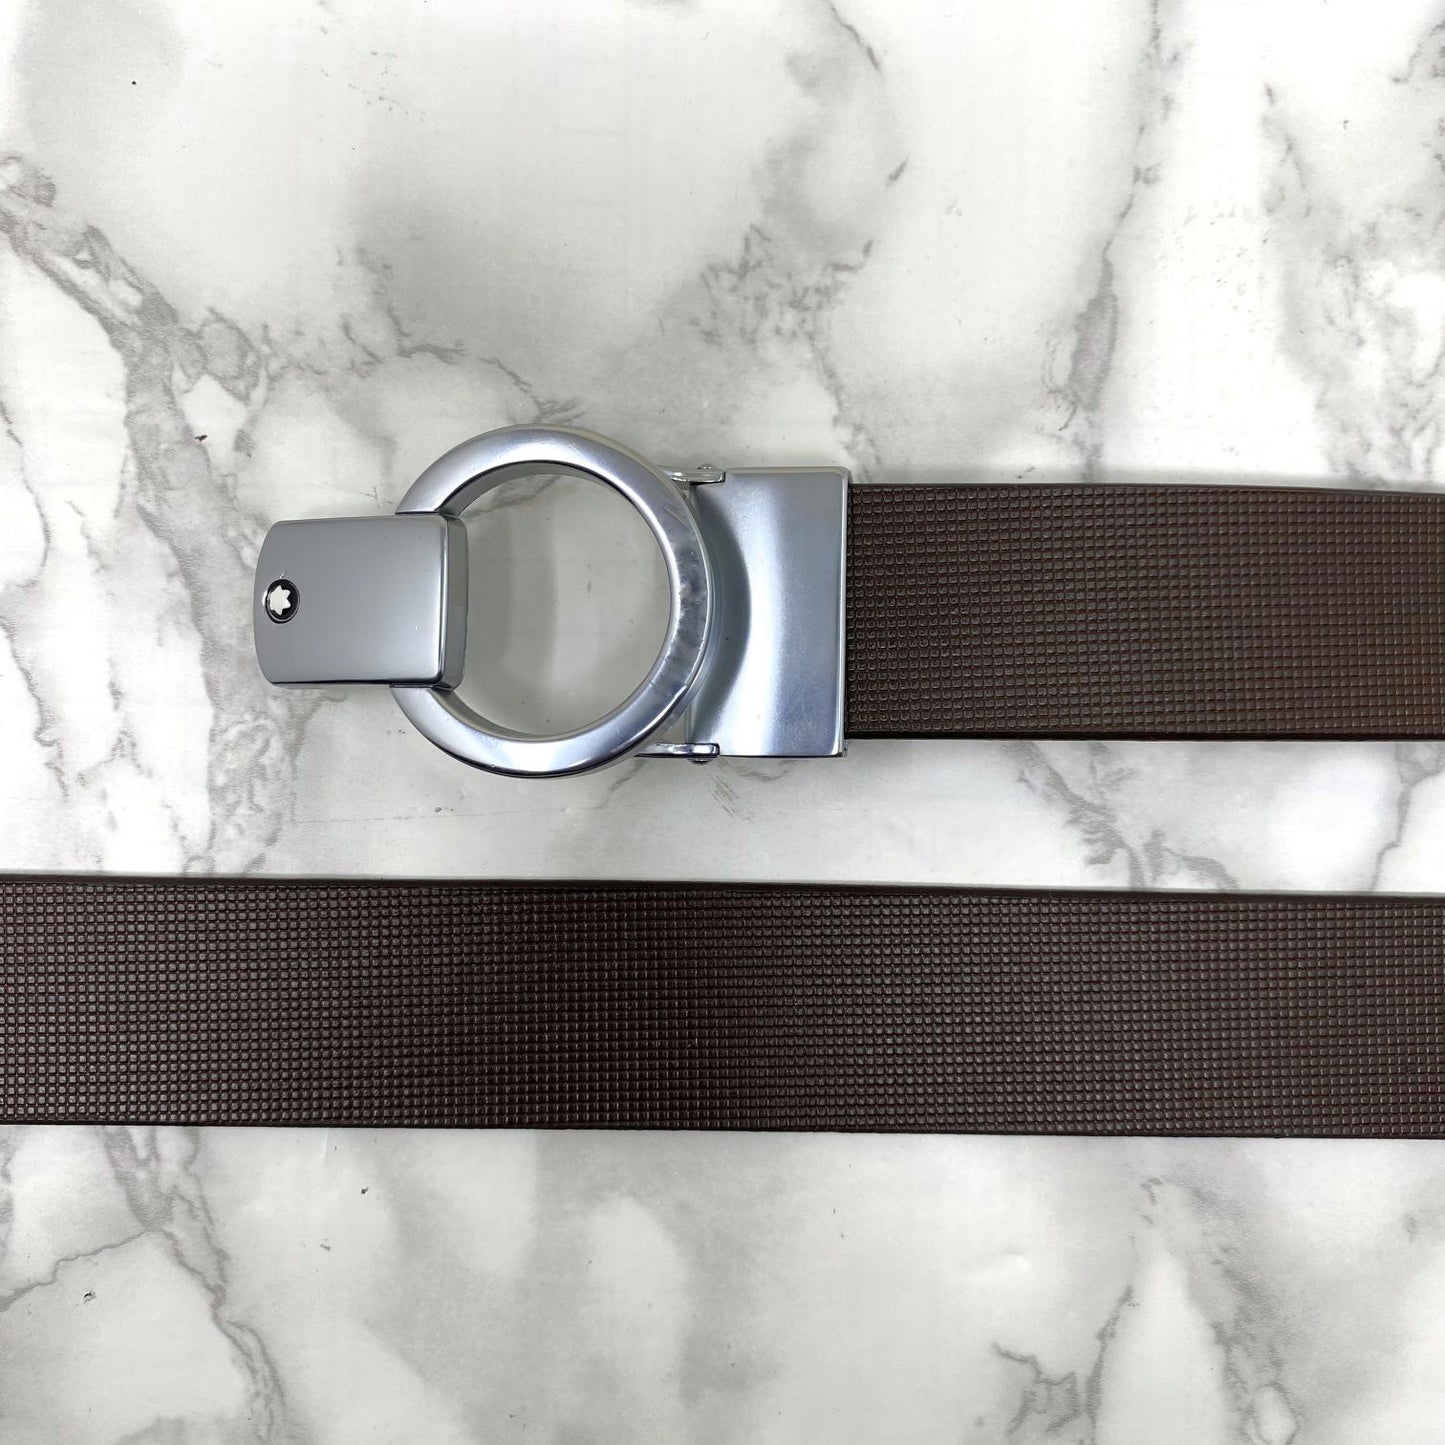 Round Lock Pattern Pressing Buckle With Leather Strap-JonasParamount